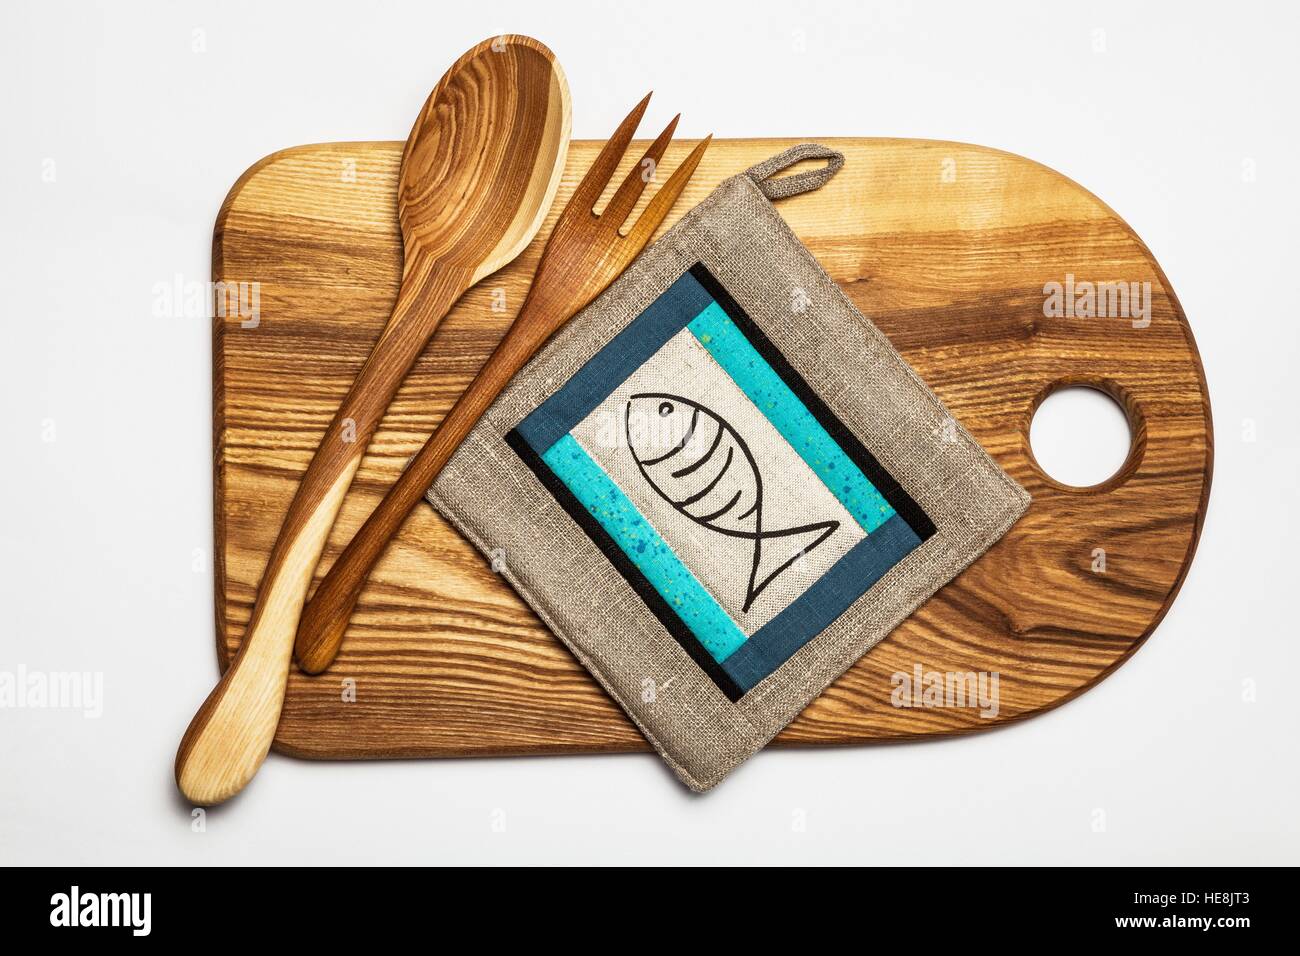 Kitchen equipment - wooden cutting board, tools and linen patchwork potholder Stock Photo